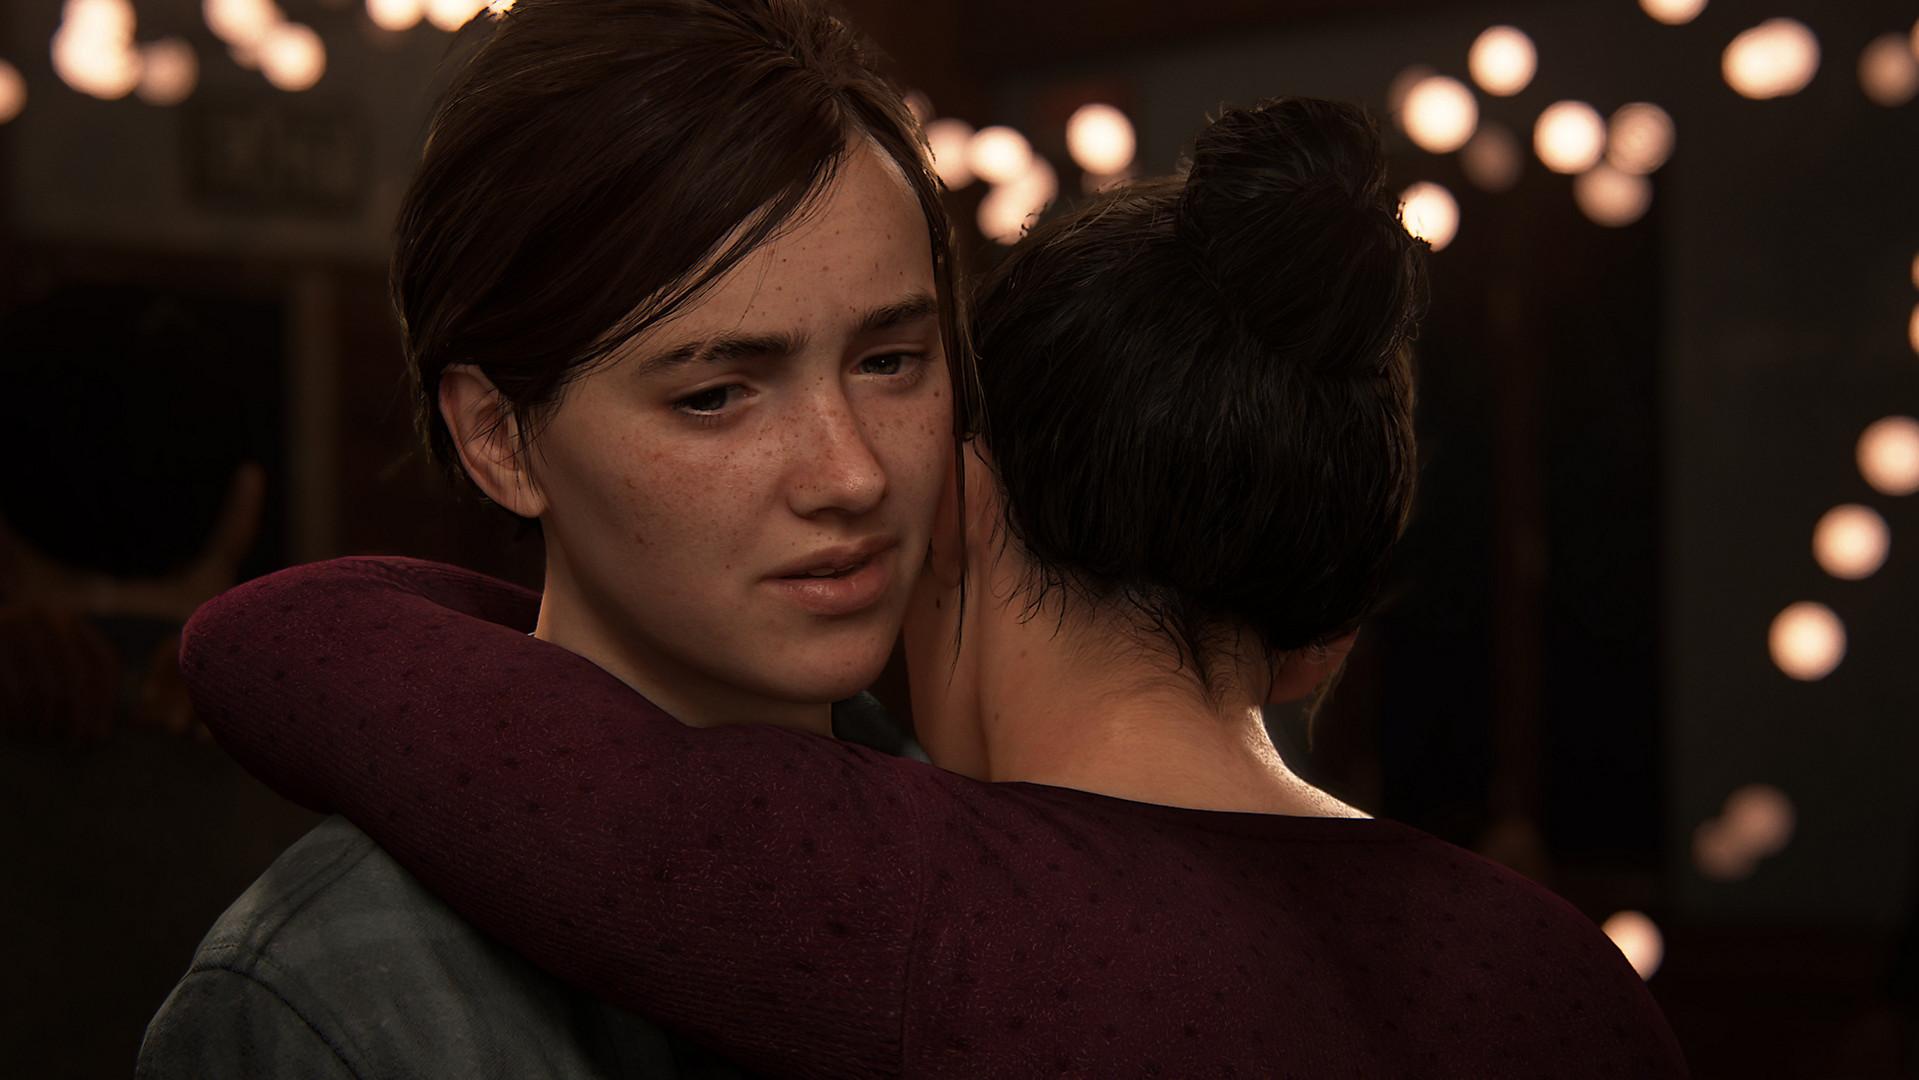 Naughty Dog expanded Ellie's personal growth and relationships in The Last of Us Part II.